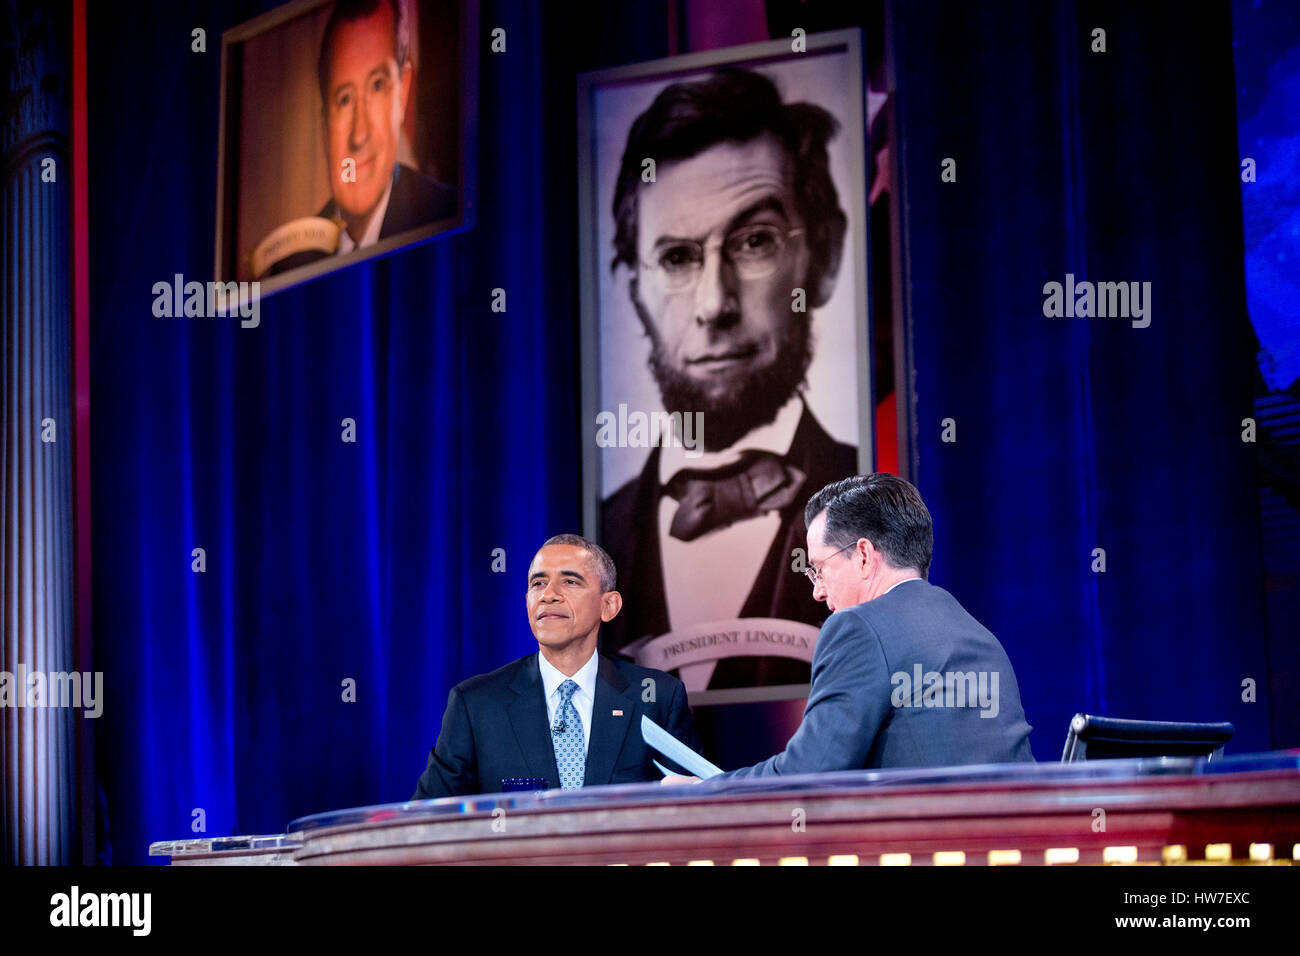 United States President Barack Obama left tapes Comedy Central's 'The Colbert Report' with television personality Stephen Colbert in Lisner Auditorium on the campus of George Washington University in Washington D.C. U.S. on Monday December 8 2014. This is Stock Photo